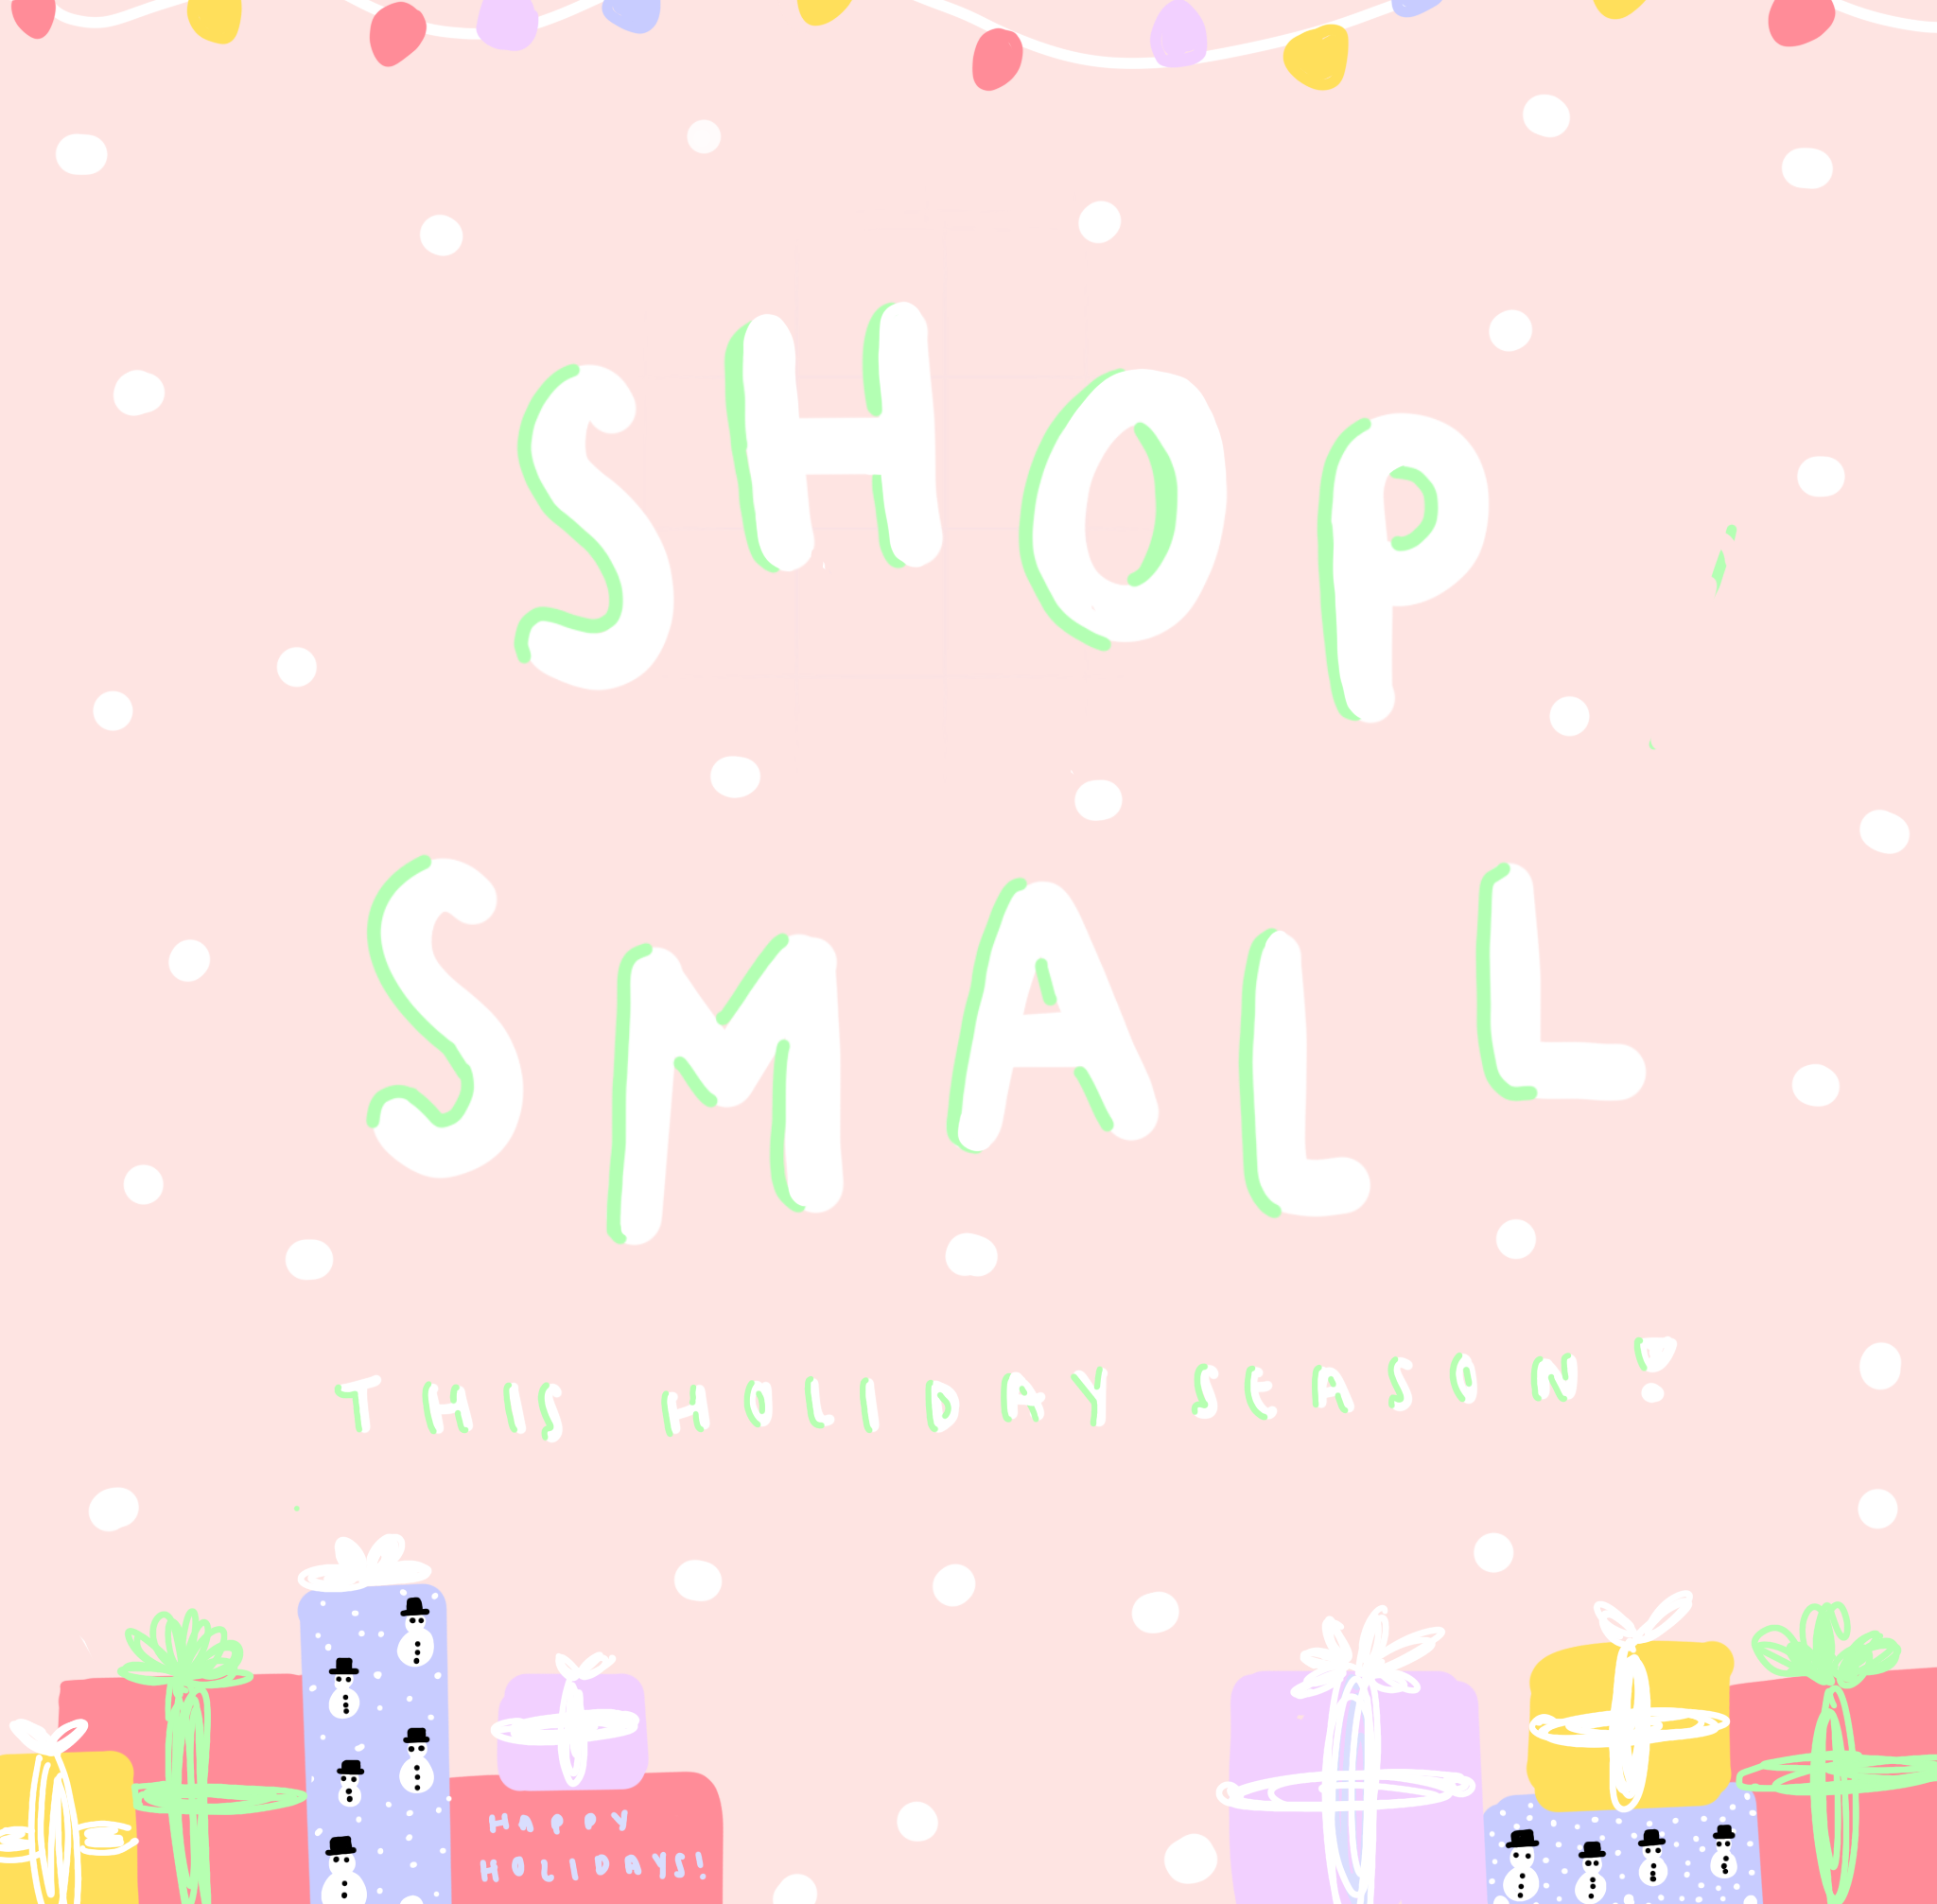 6 Small Businesses To Support This Holiday Season!